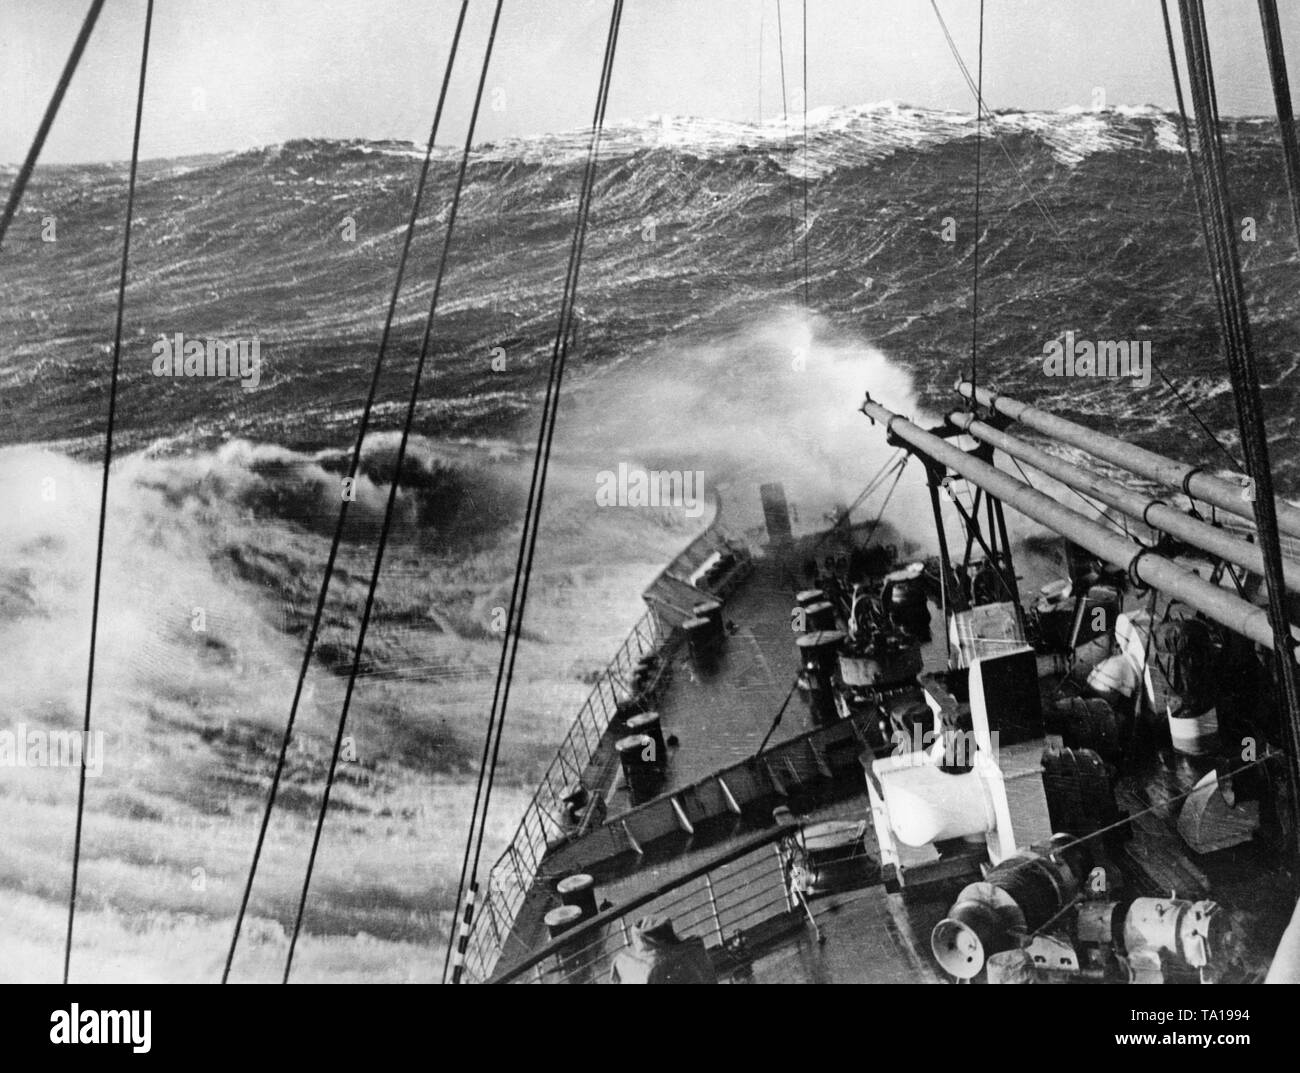 The HAPAG steamer 'Deutschland' in heavy seas on the North Atlantic. Stock Photo